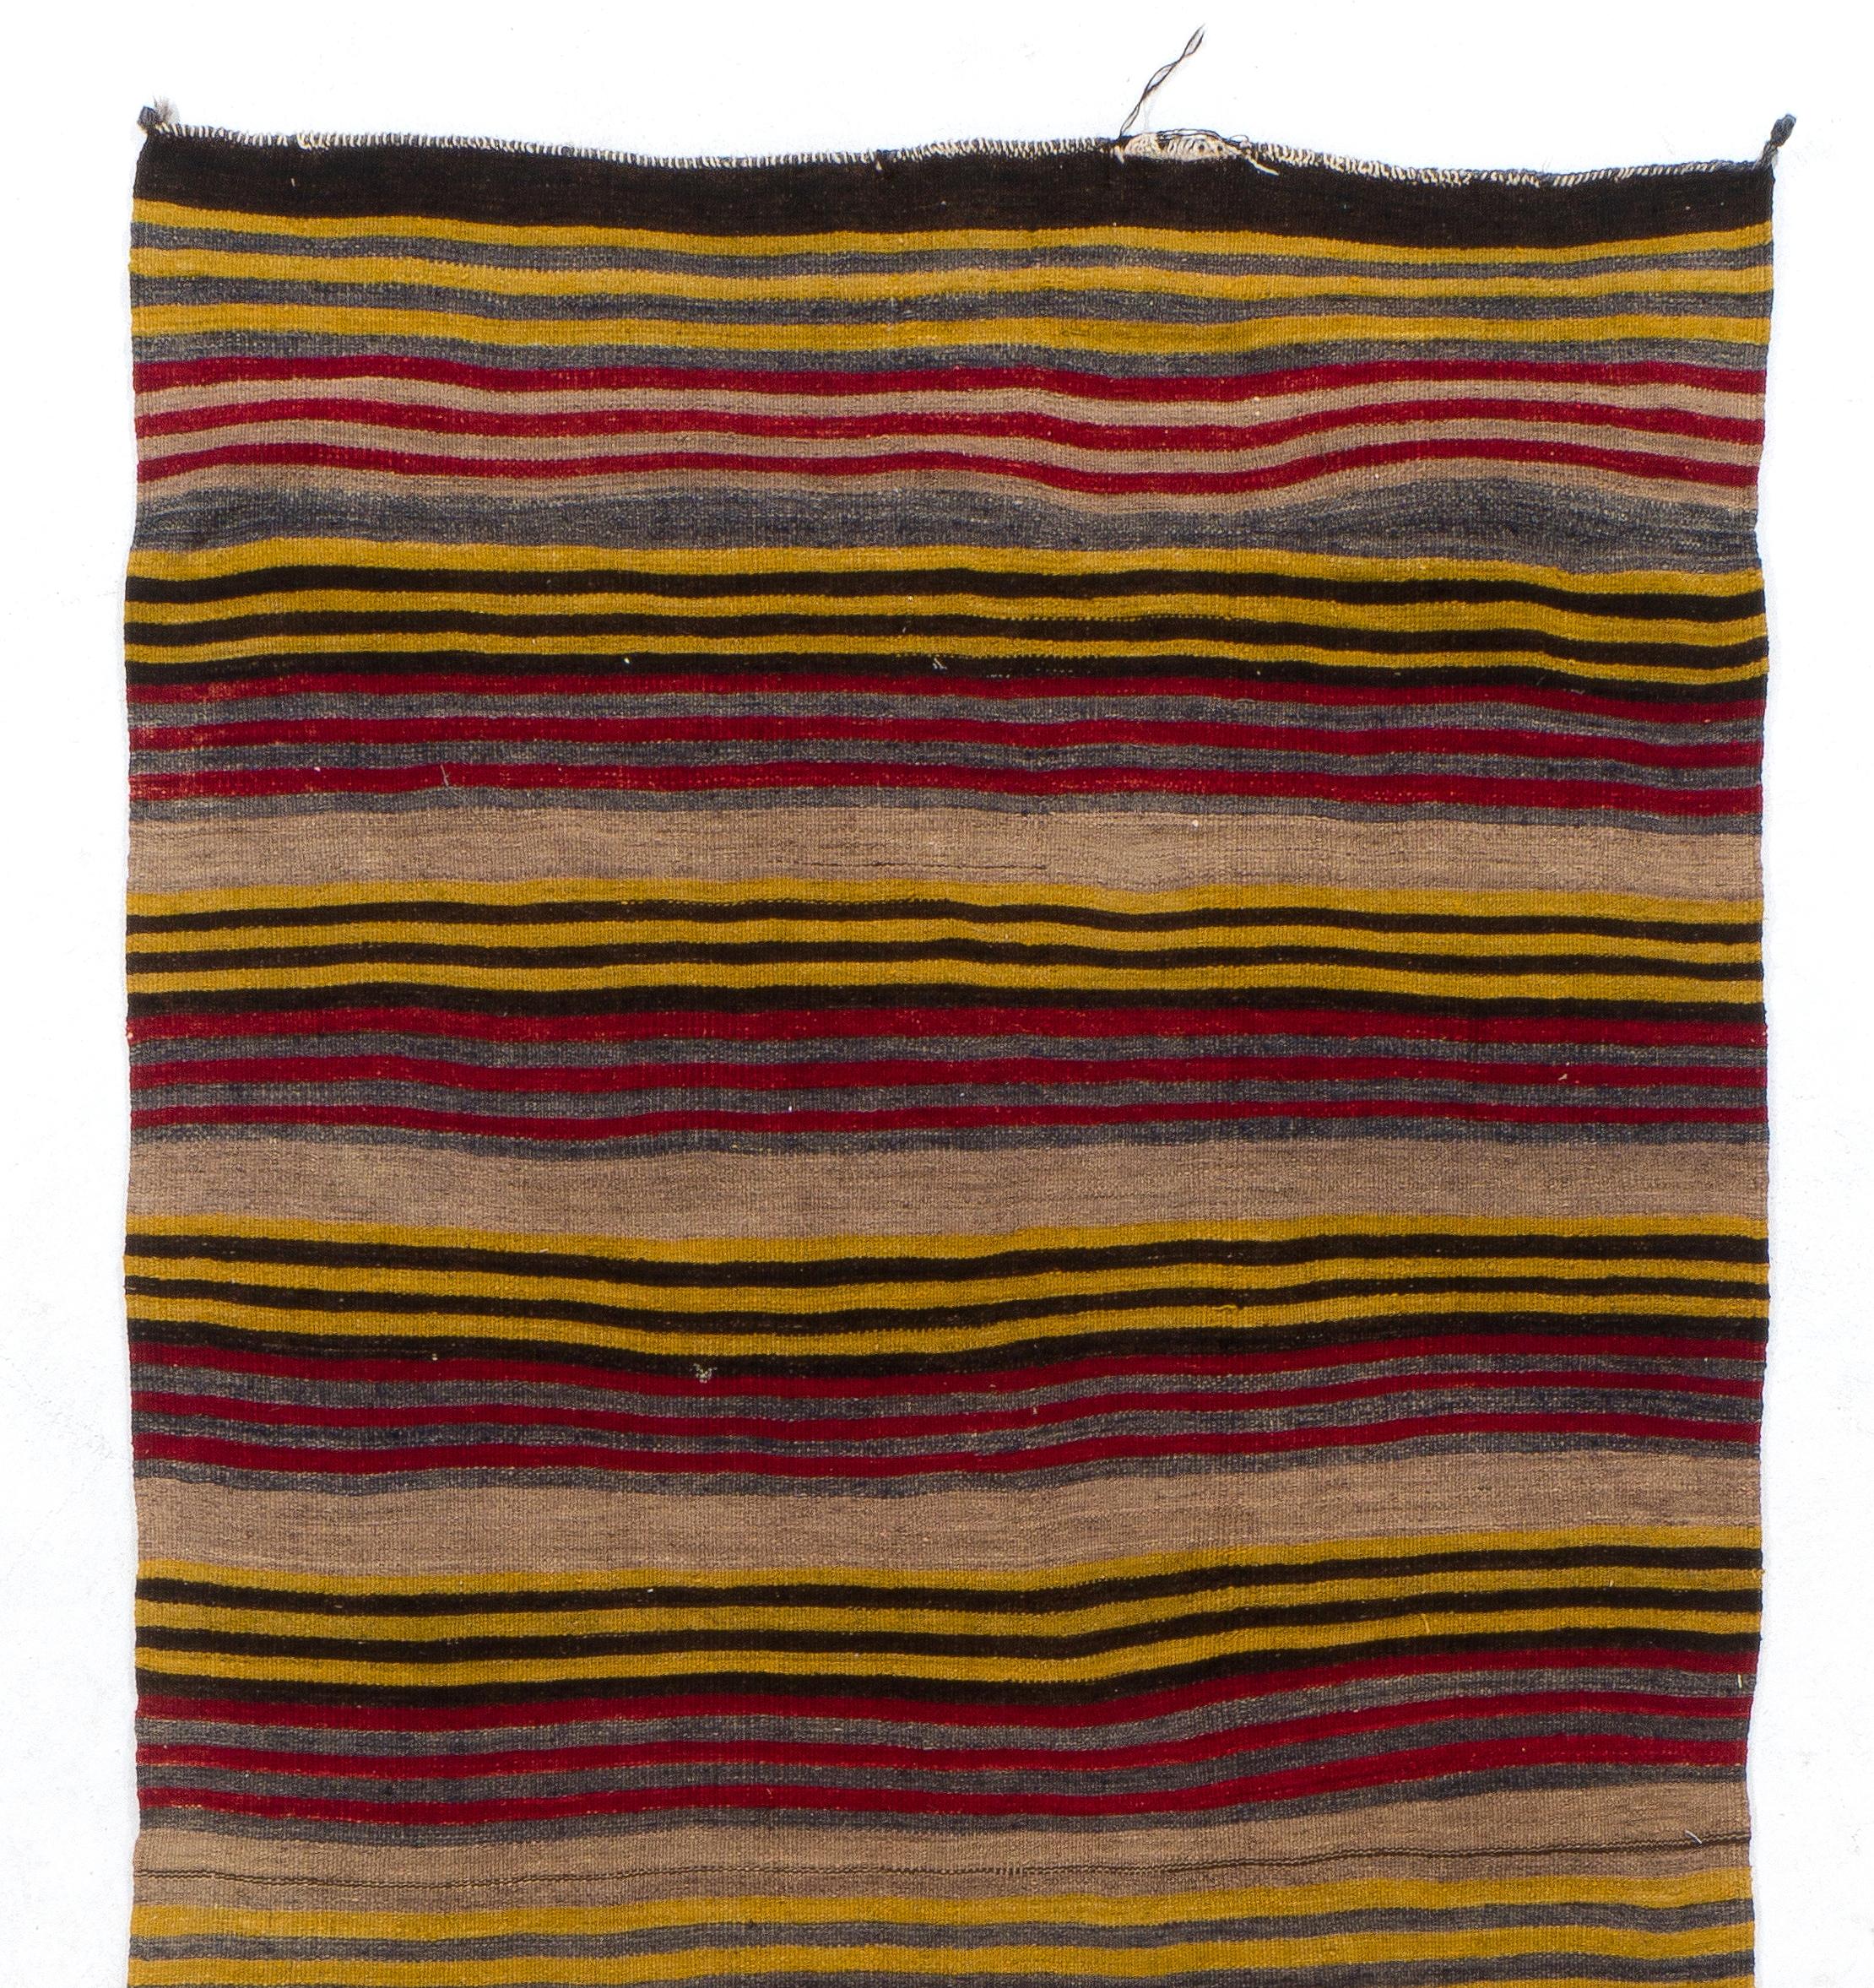 A simple yet beautiful wool kilim/flat-weave handwoven by the nomadic tribes in the 1960s in South Central Turkey with a striped design in ruby red, oatmeal, faded blue, mustard yellow and dark brown. The kilim was handwoven with fine hand-spun